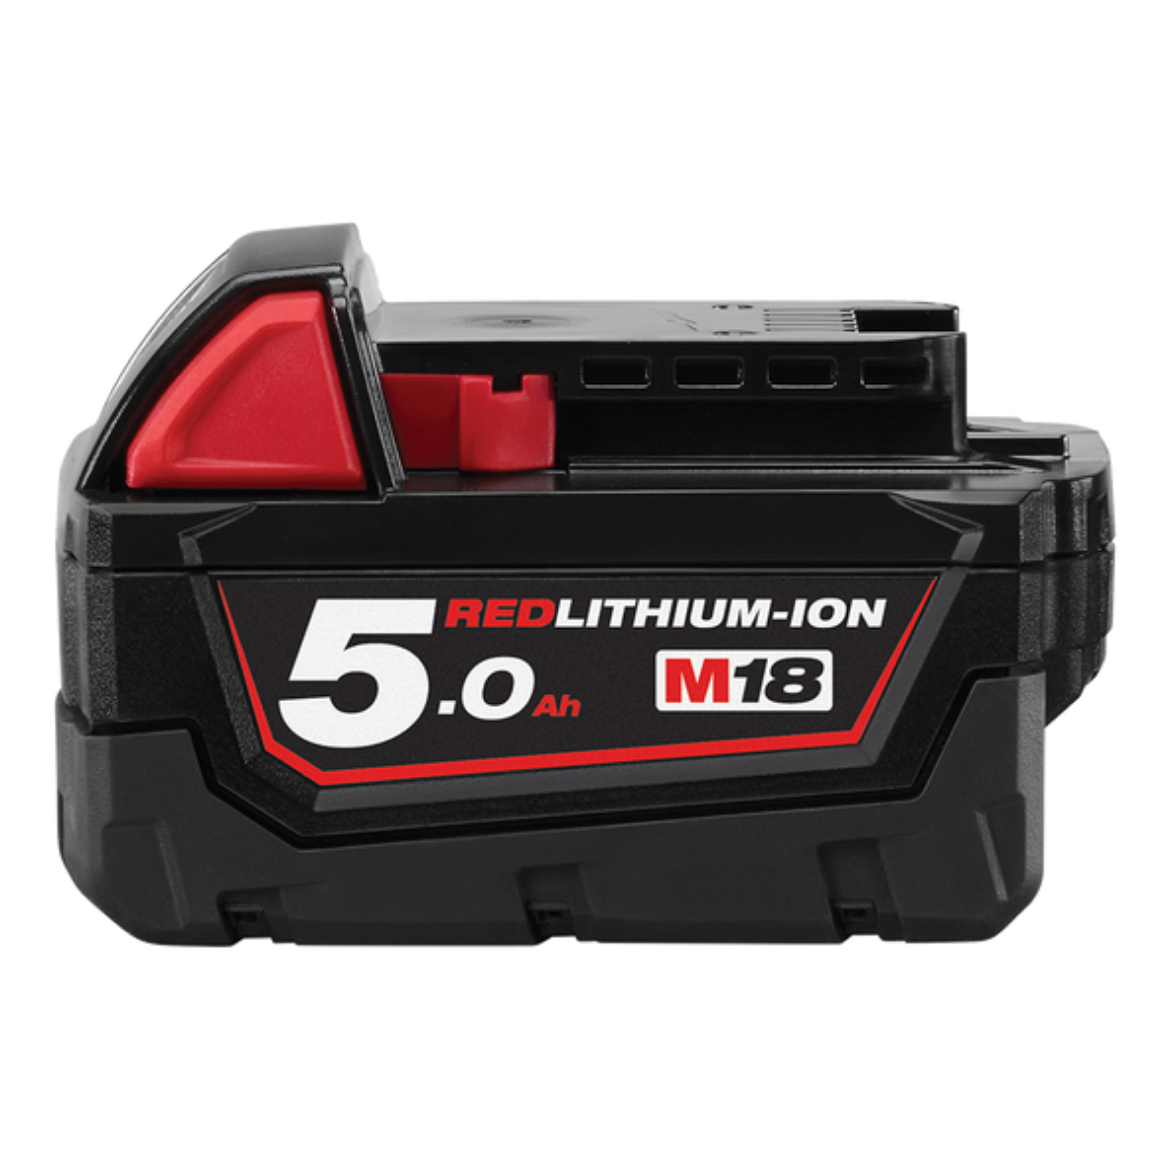 Picture of MILWAUKEE M18 REDLITHIUM-ION 5.0AH BATTERY